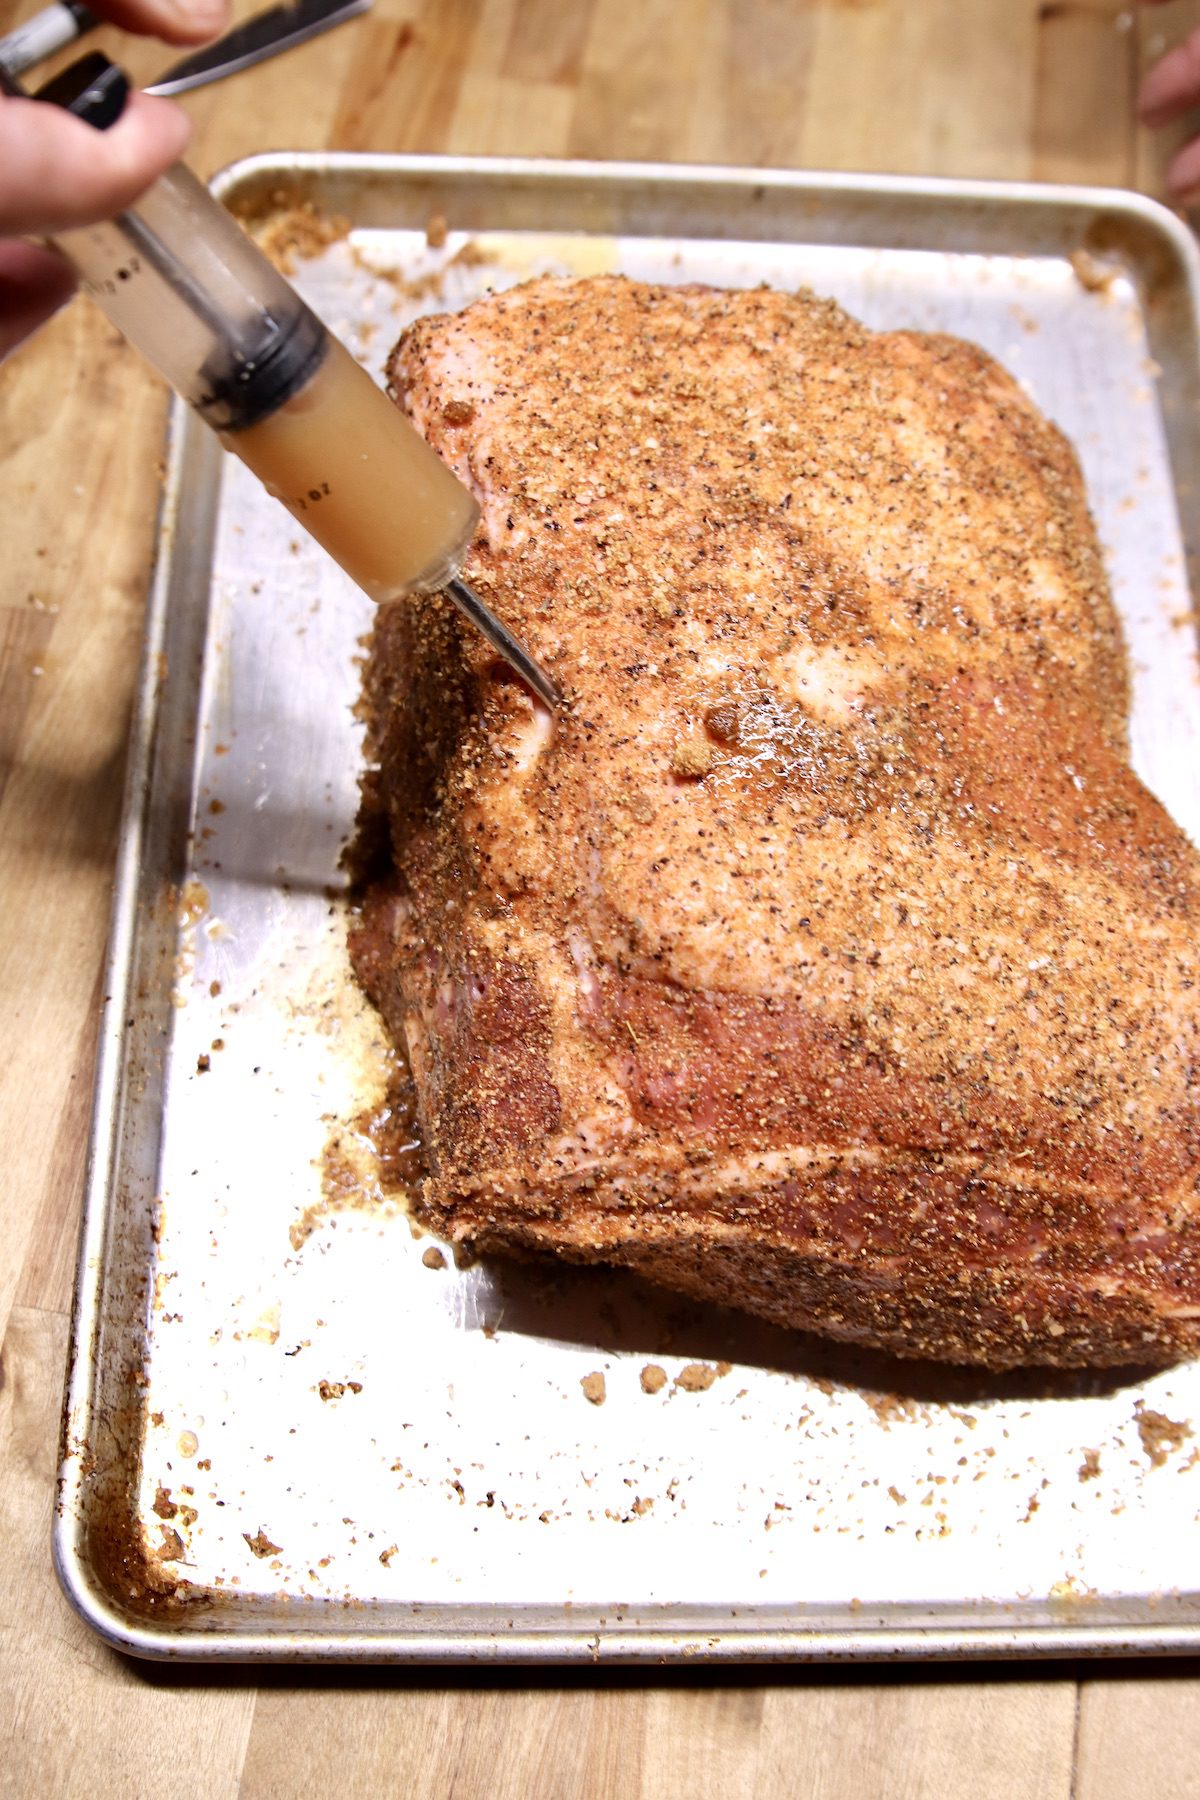 Injecting Pork Shoulder With a Meat Injector